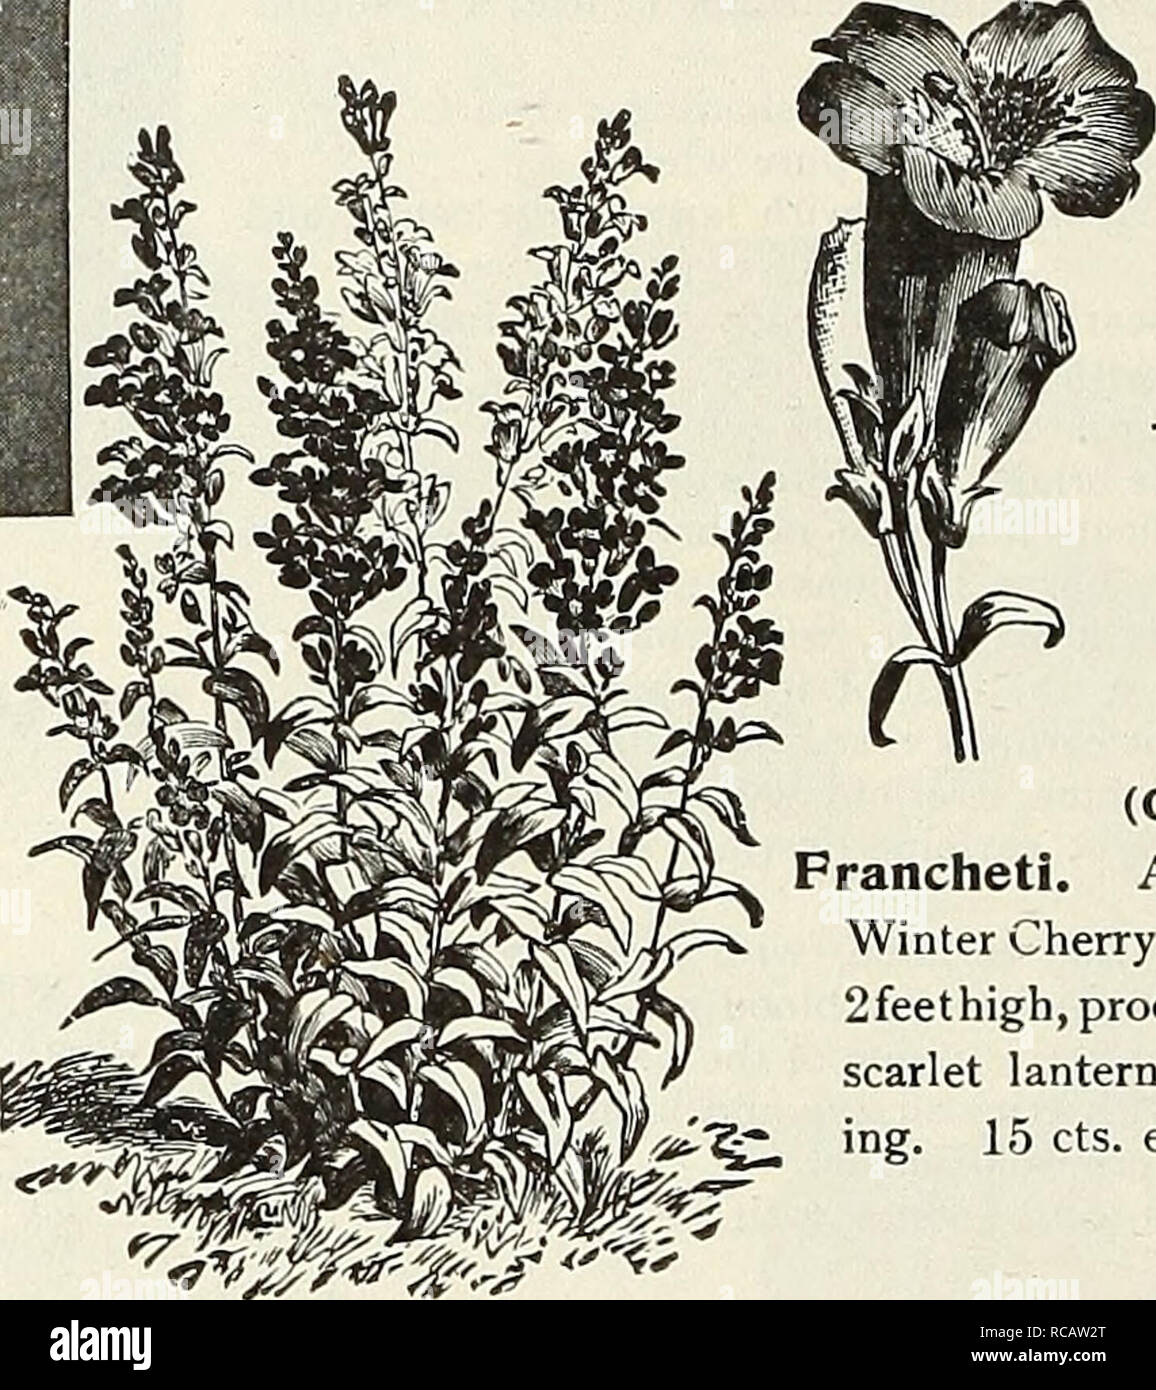 . Dreer's garden book 1916. Seeds Catalogs; Nursery stock Catalogs; Gardening Equipment and supplies Catalogs; Flowers Seeds Catalogs; Vegetables Seeds Catalogs; Fruit Seeds Catalogs. Phlox Divaricata PENTSTEMON (Beard Tongue). Most useful showy perennials, either fir the border or rockery. With the exception of Sen- sation, which requires protection, they are per- fectly hardy. Gloxinioides &quot;Sensation.&quot; A beautiful strain, bearing spikes of large Gloxinia-like flowers in a great variety of bright colors, including rose, cherry, crimson, purple, lilac, etc. The plants grow 2 feet hig Stock Photo